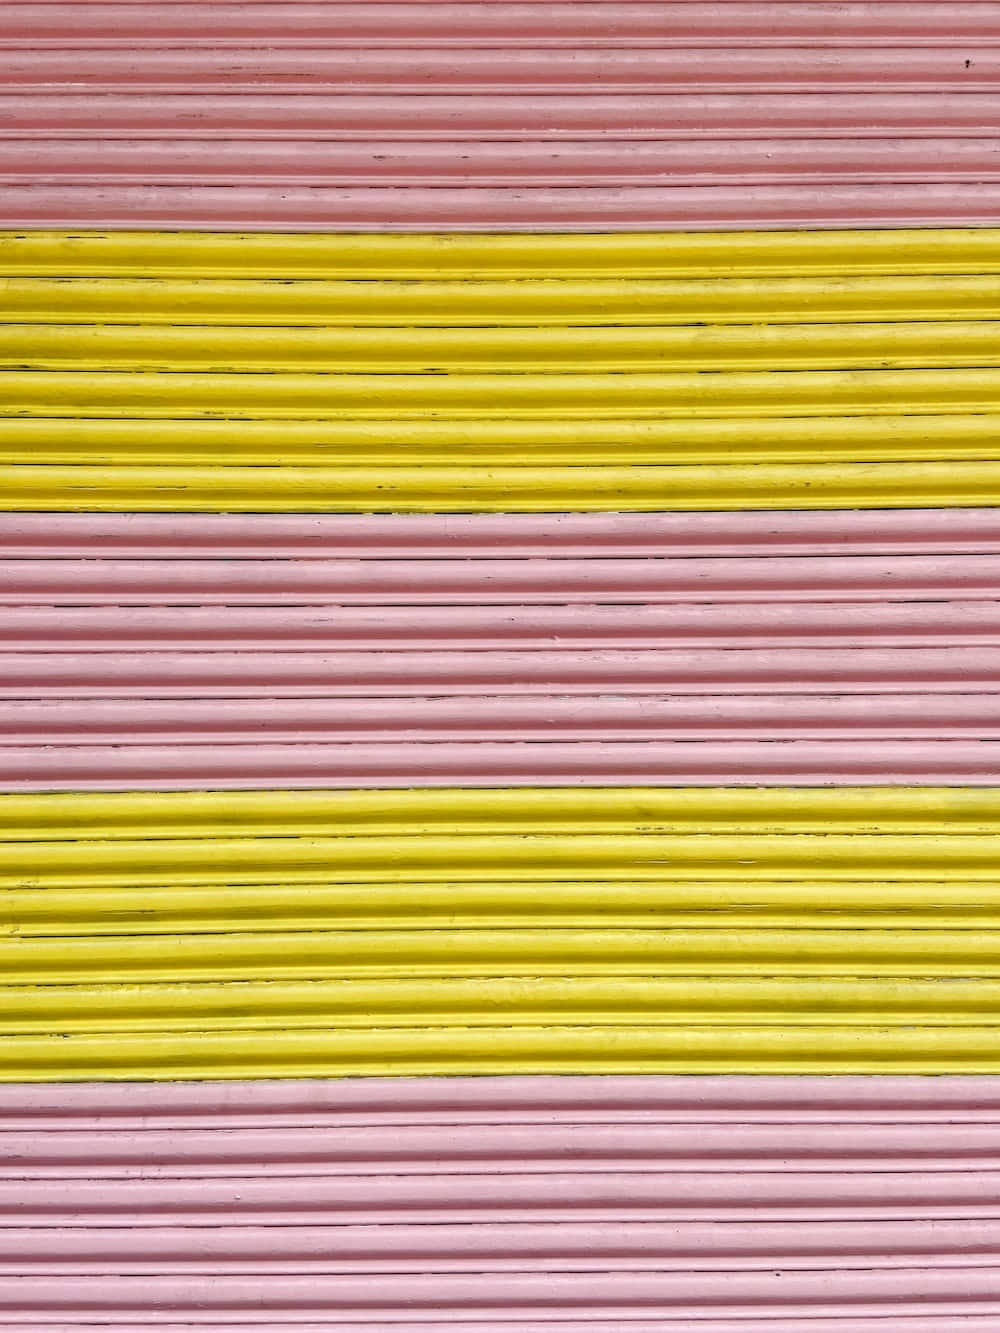 Follow your joy with a vibrant yellow and pink background